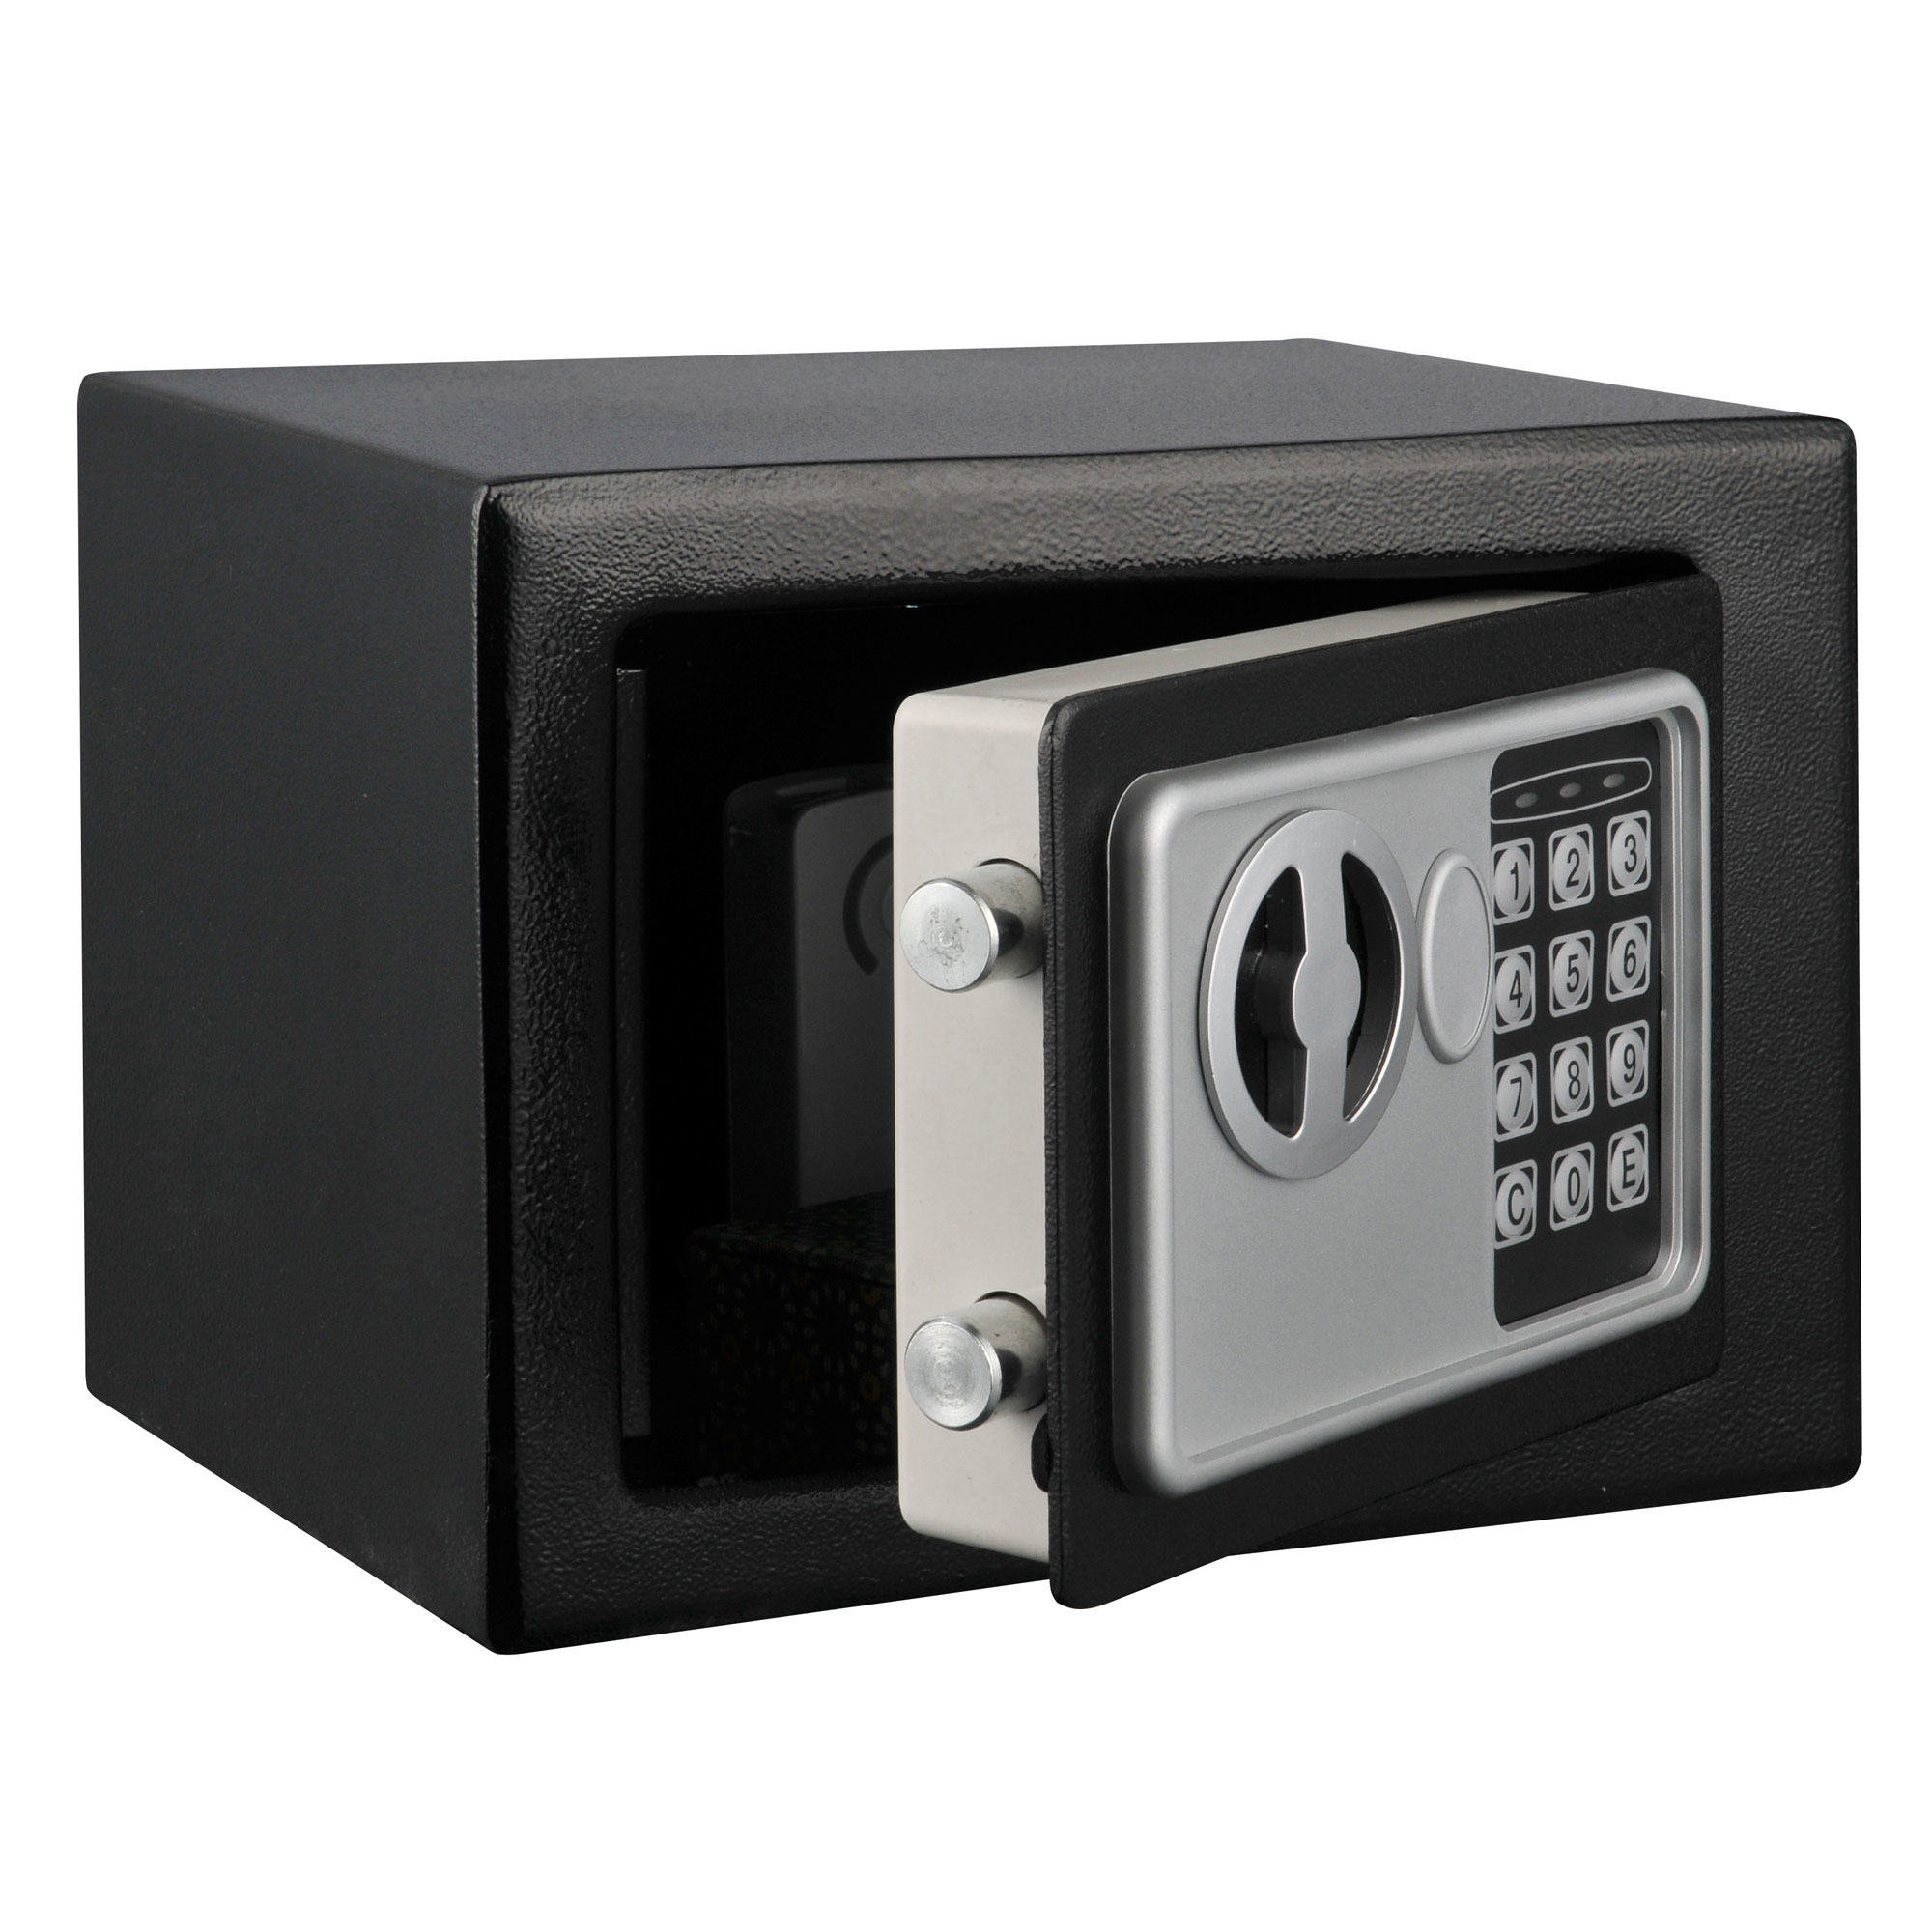 Digital Security Safe Box For Valuables Compact Waterproof And Fireproof Steel Lock Box With Electronic Combination Keypad